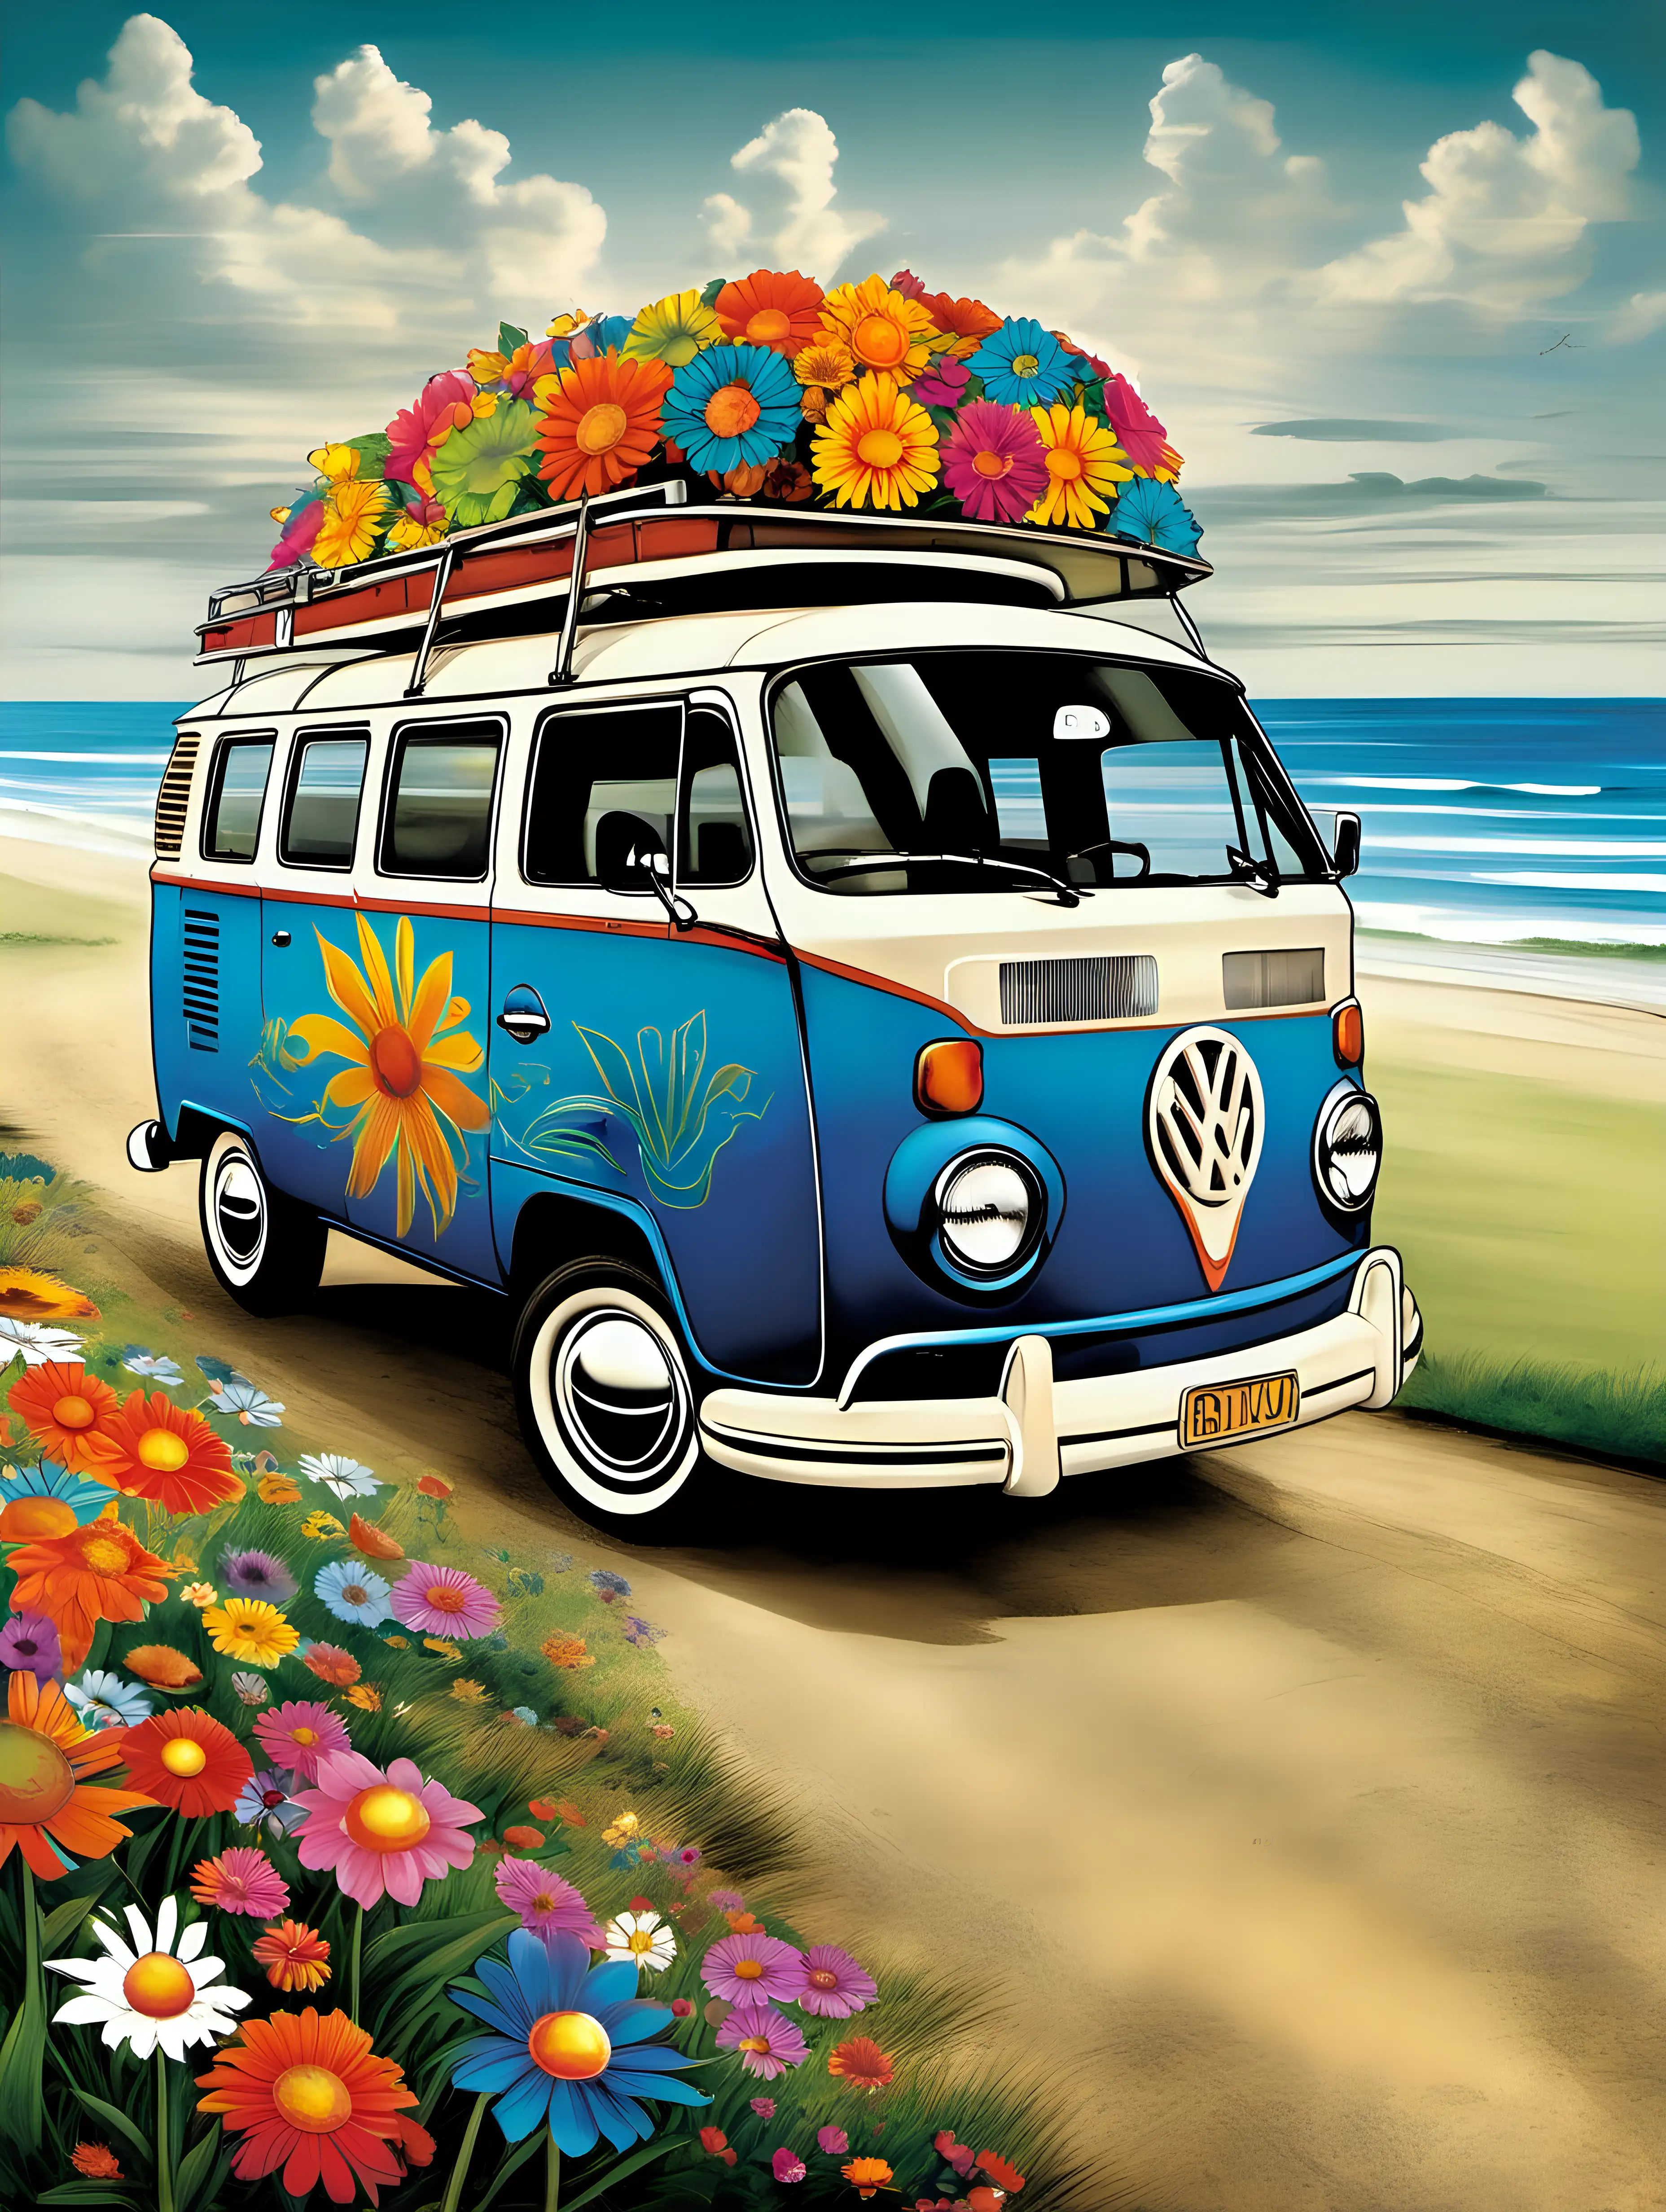 Vibrant Kombi Van with Colorful Flowers Symbolizing Freedom and 1960s Counterculture